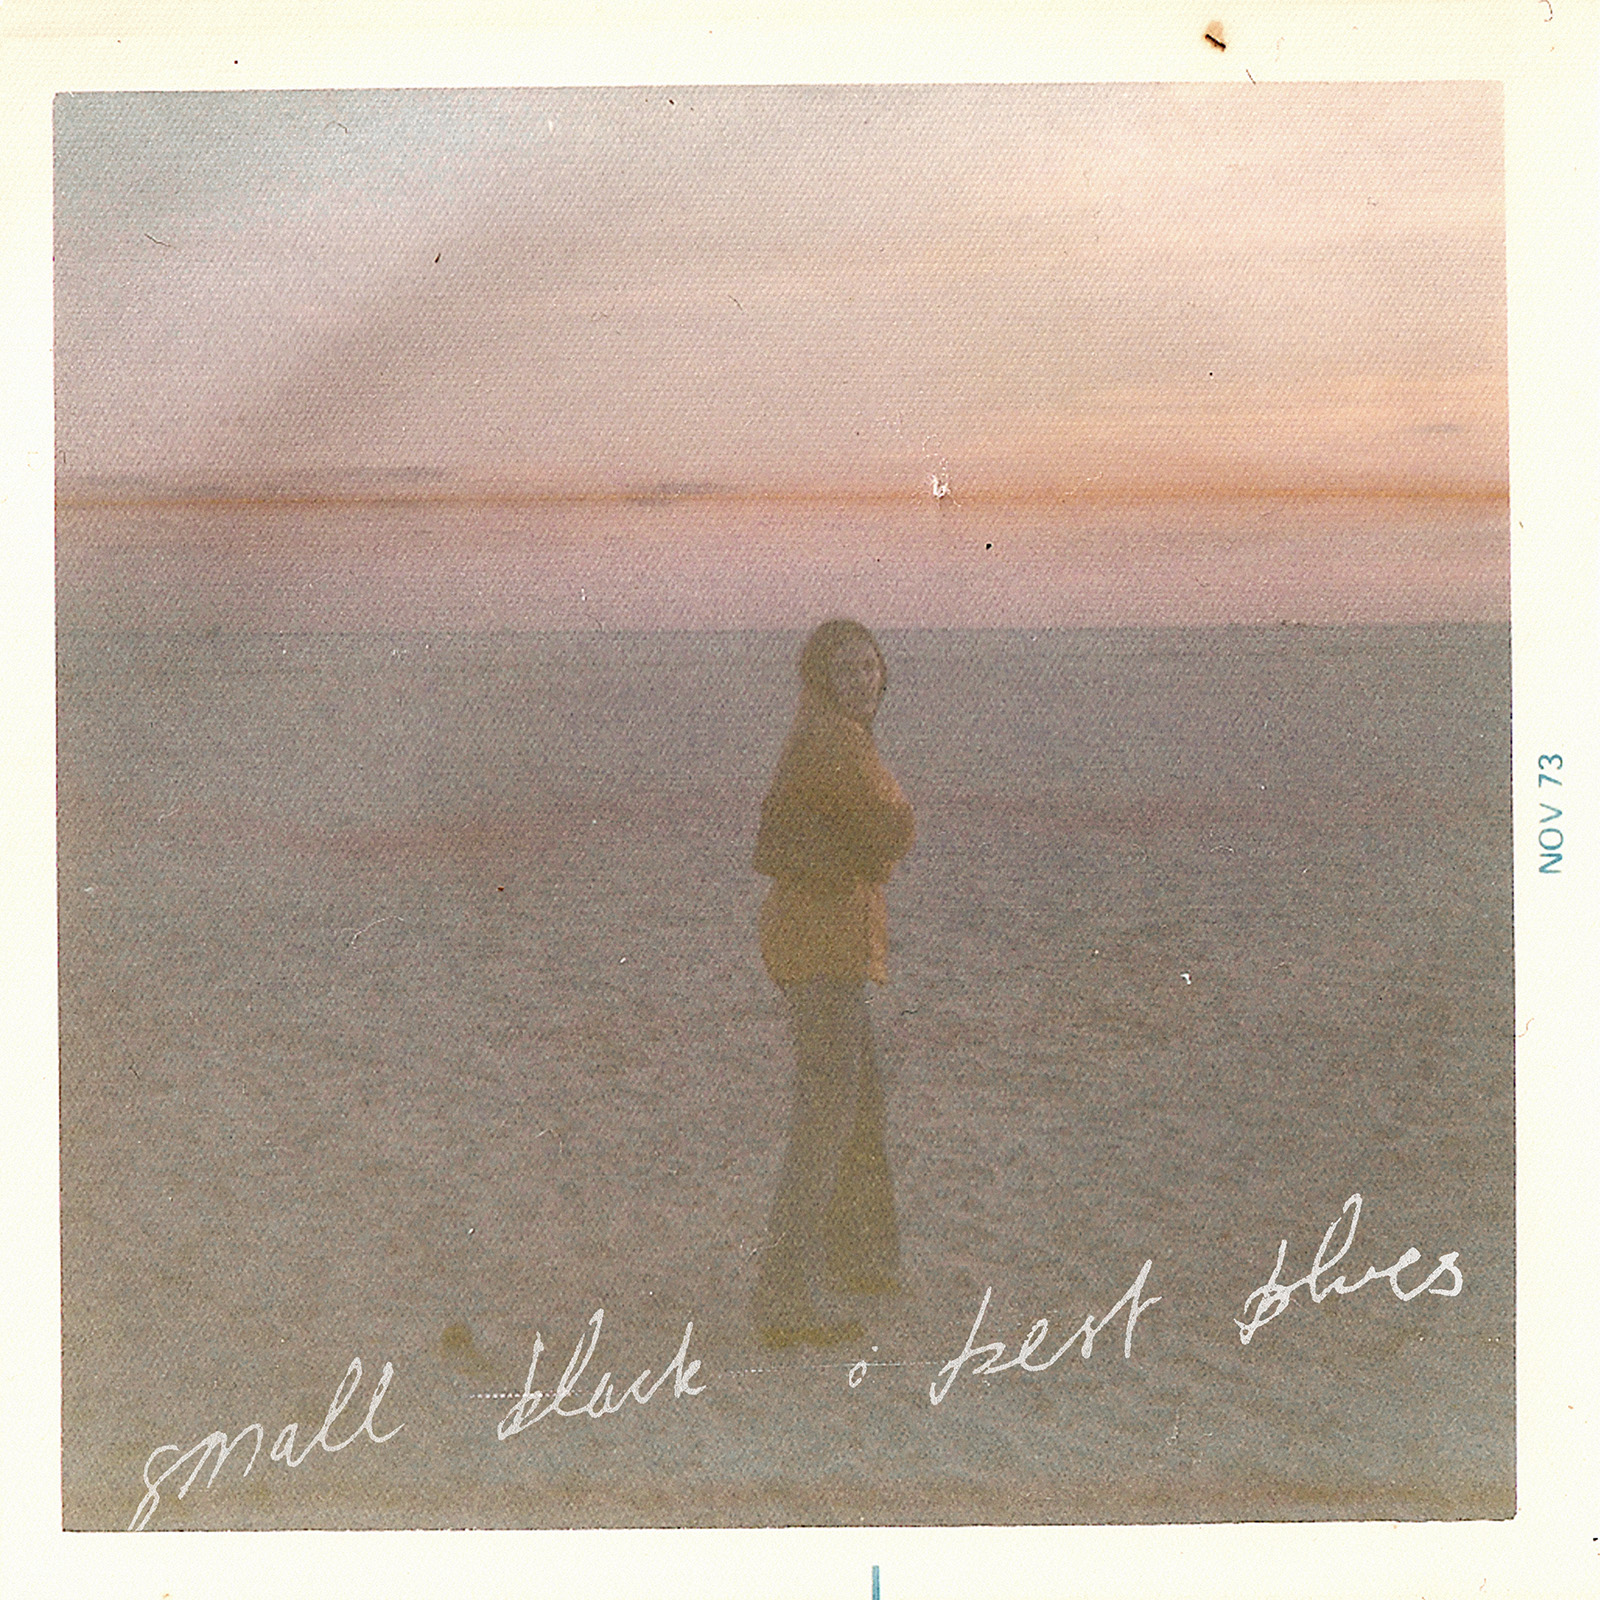 Review of 'Best Blues' the new full length from Small Black.